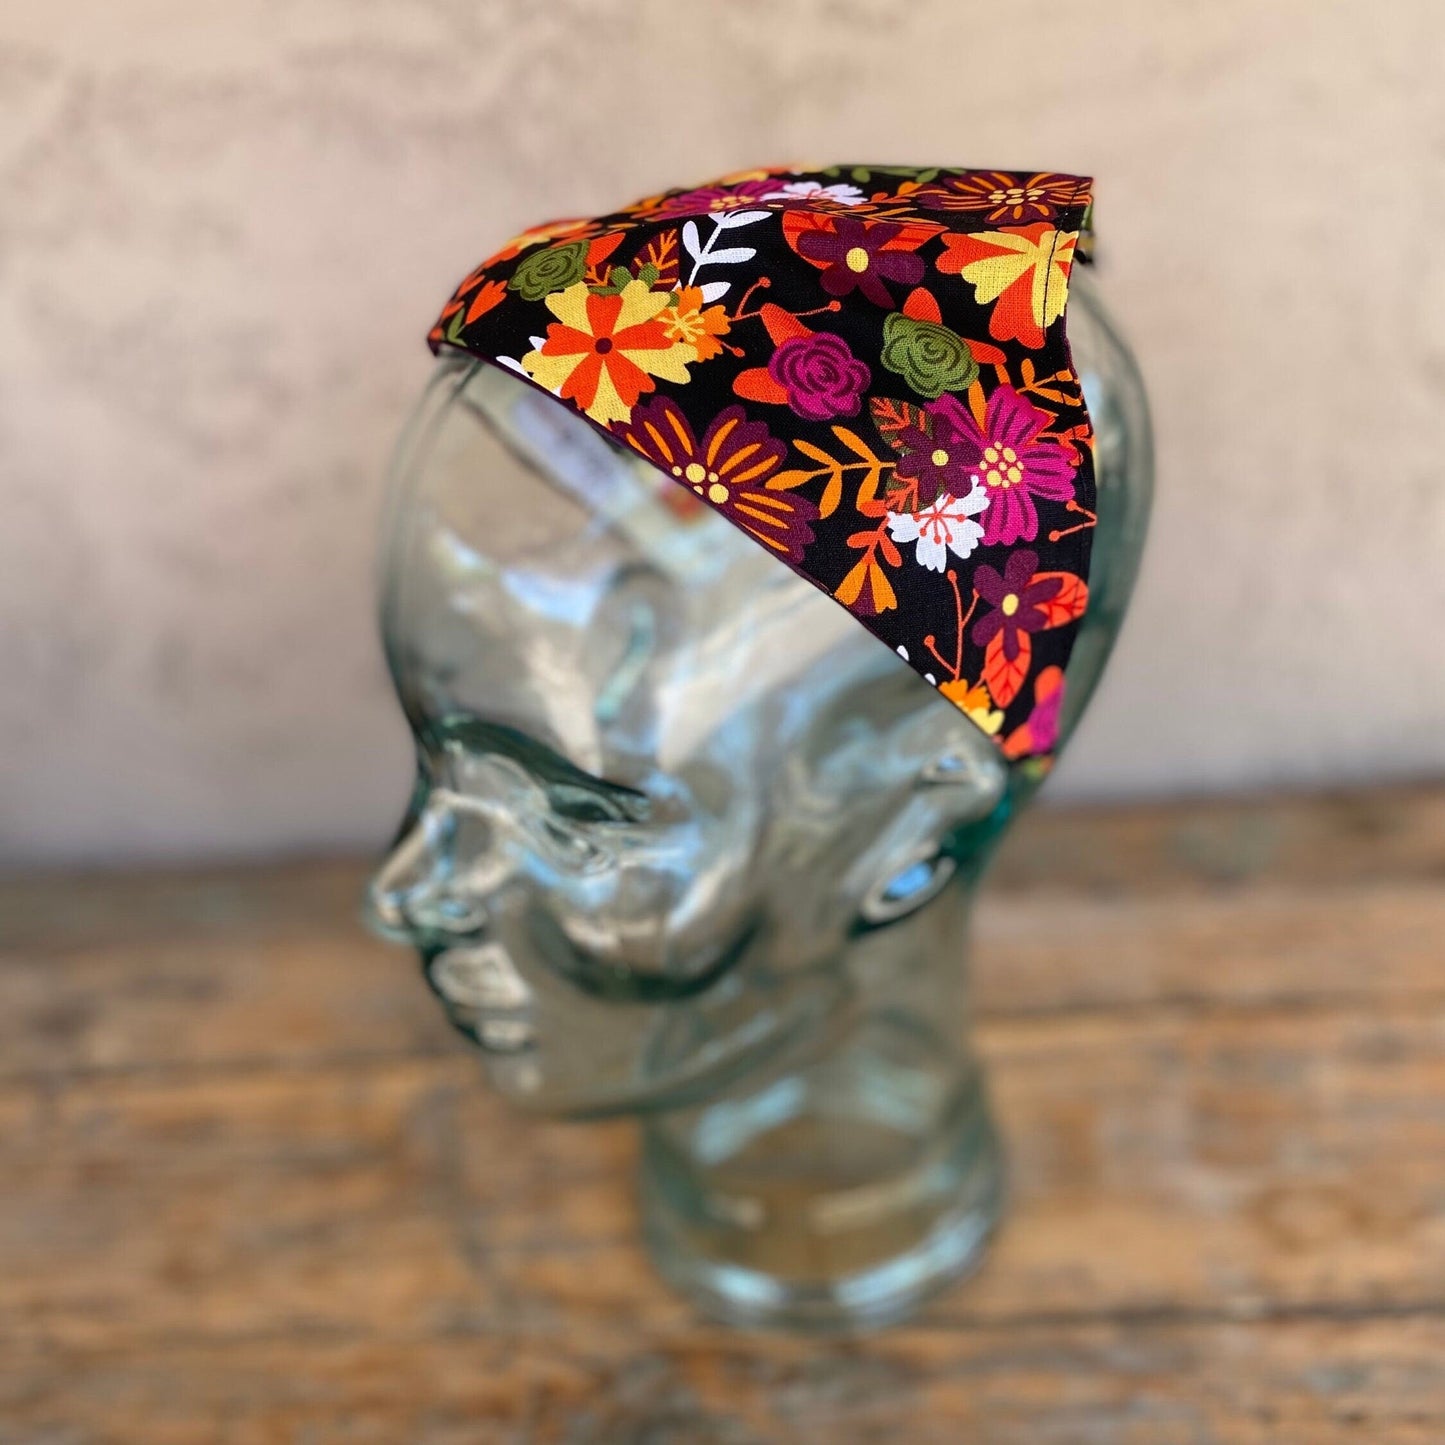 Triangle head scarf that has been attached to a headband. The print is a colorful floral design with orange, pinks , yellow and burgundy colors. Black background.